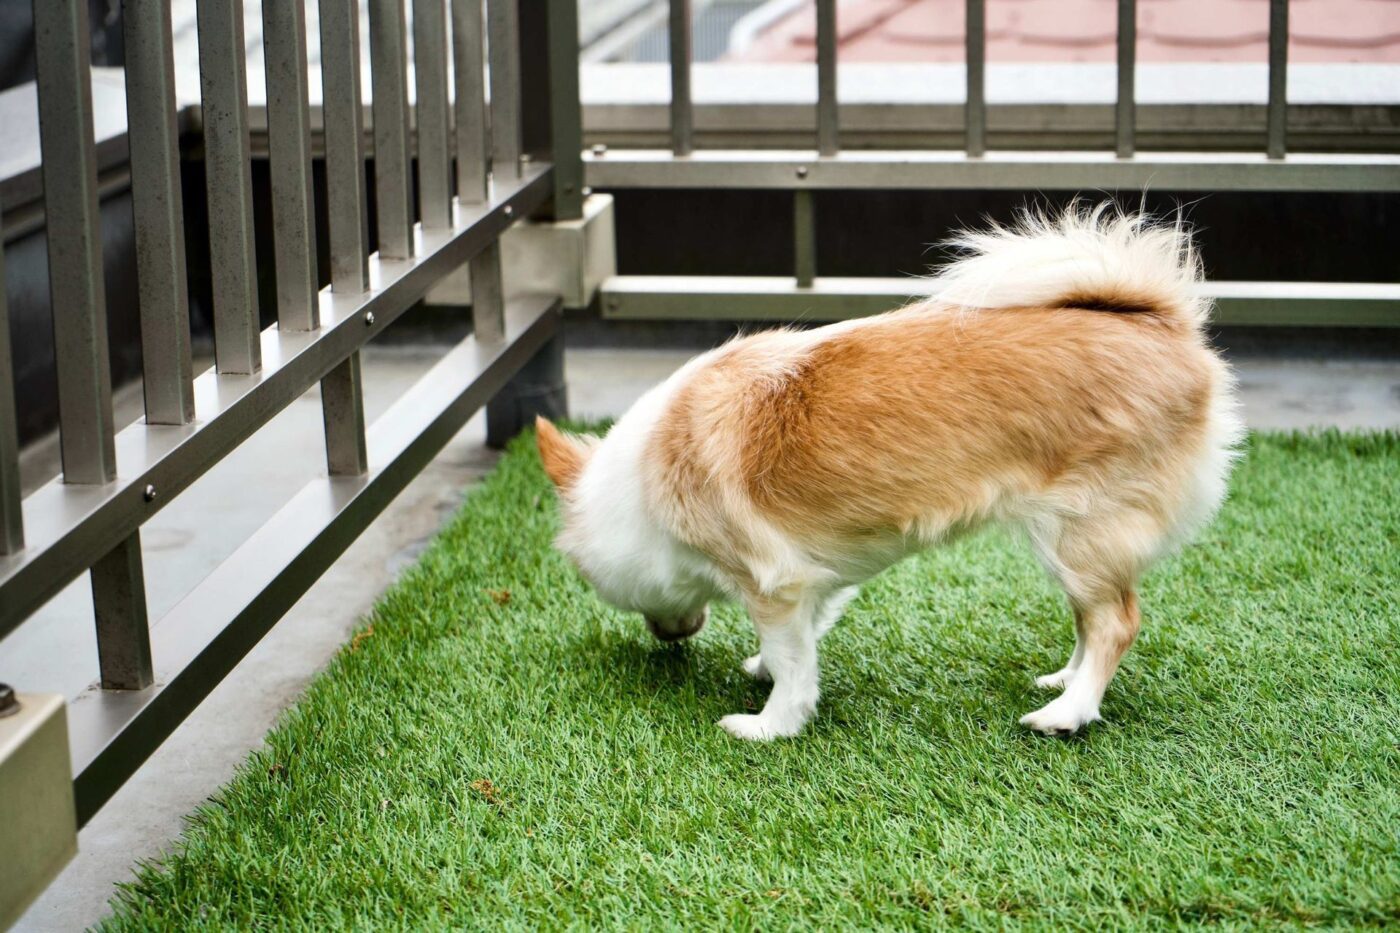 A small tan and white dog with a bushy tail sniffs the Jacksonville Artificial Turf on a balcony. The balcony, adorned with a black metal railing, overlooks Palm Valley FL. The dog appears curious and focused.